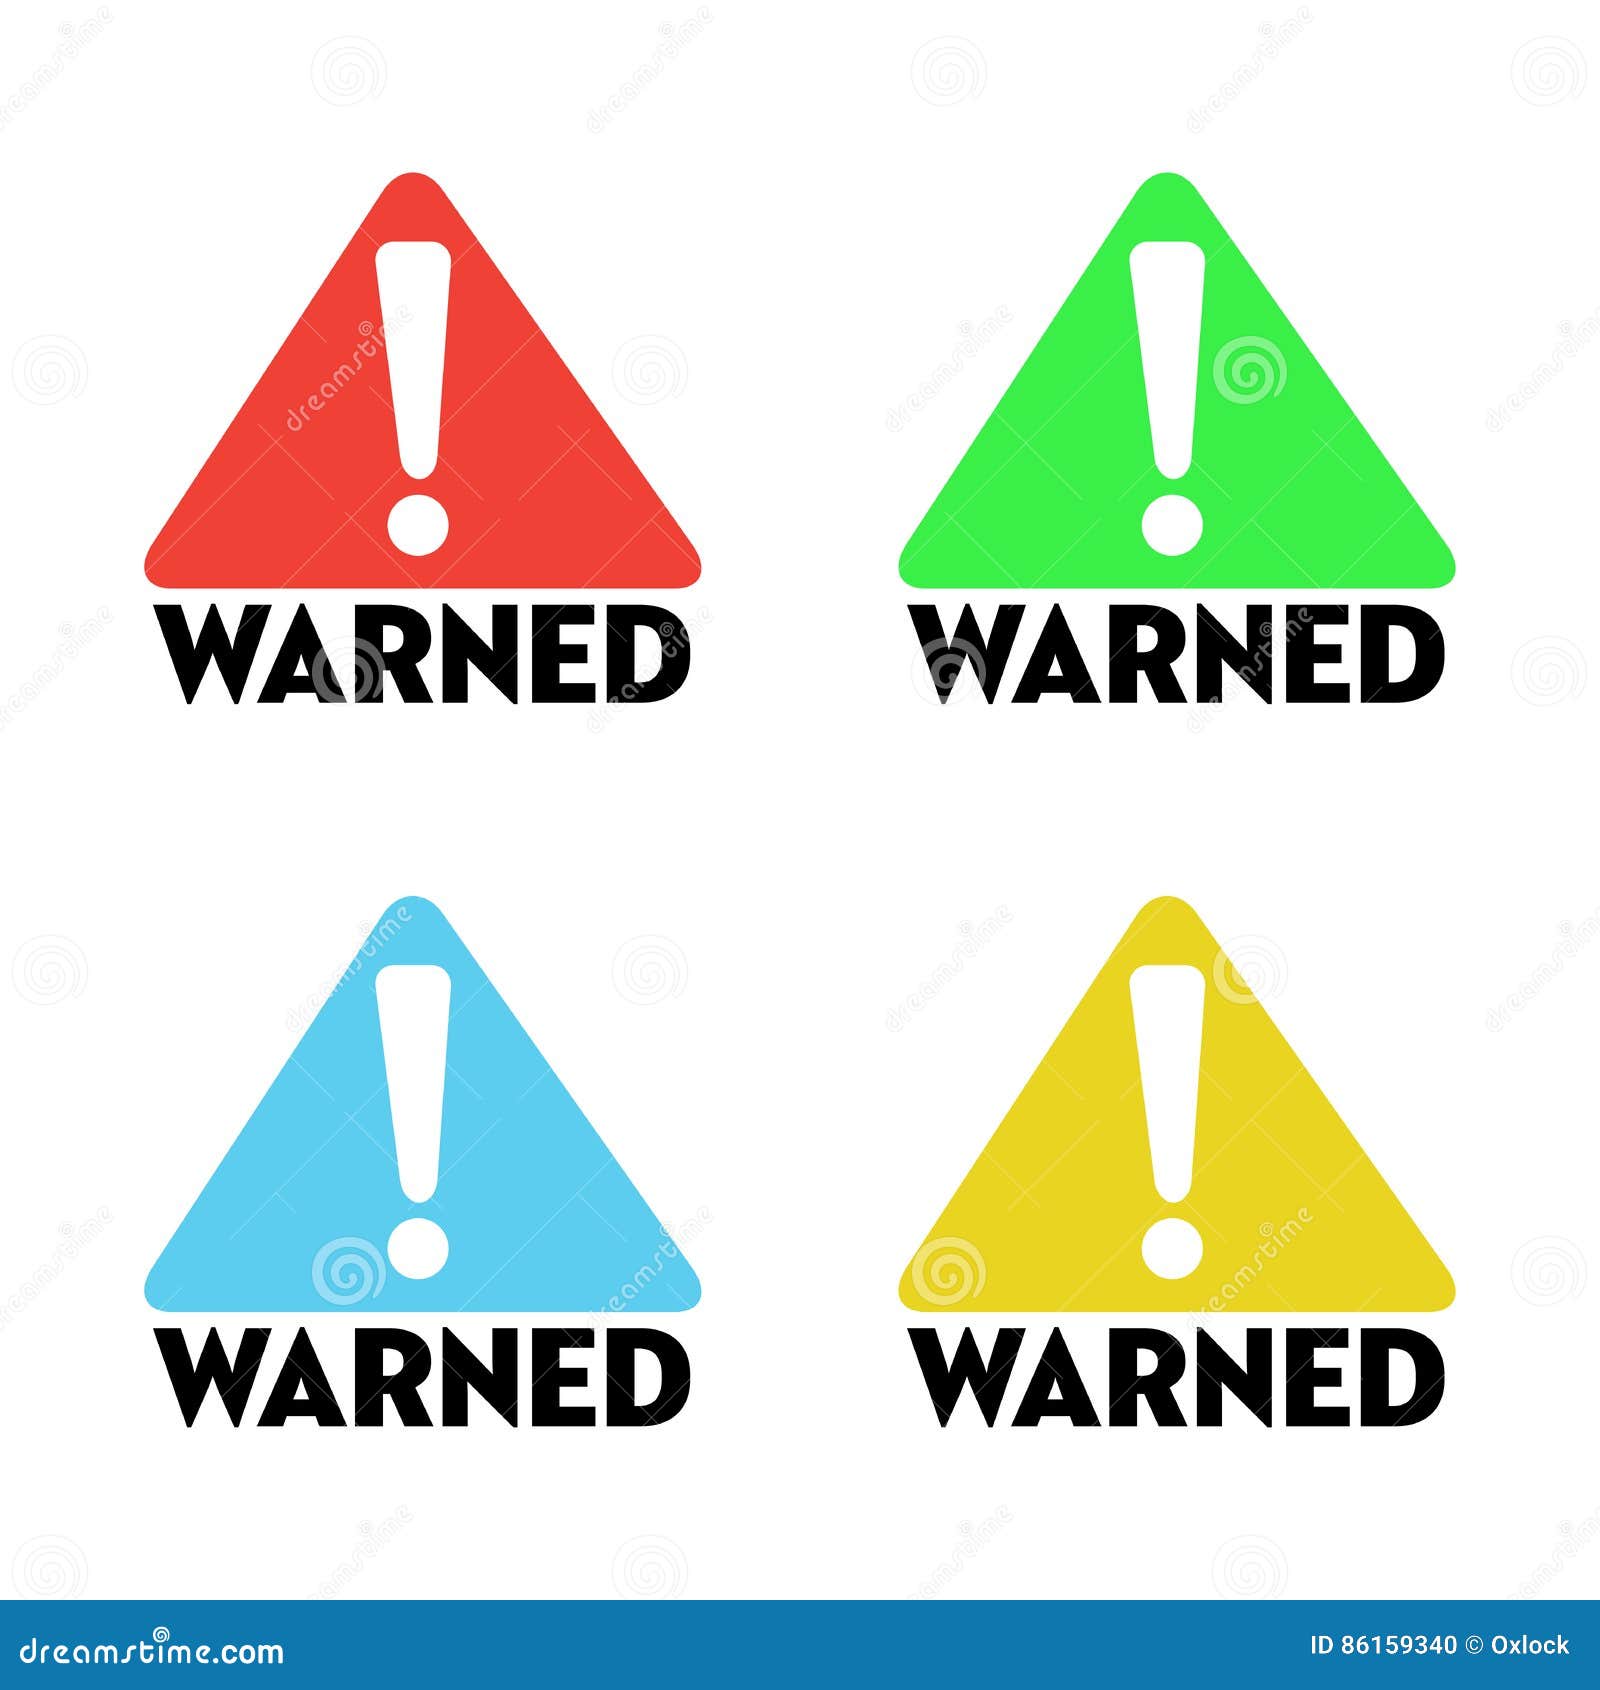 warned signs